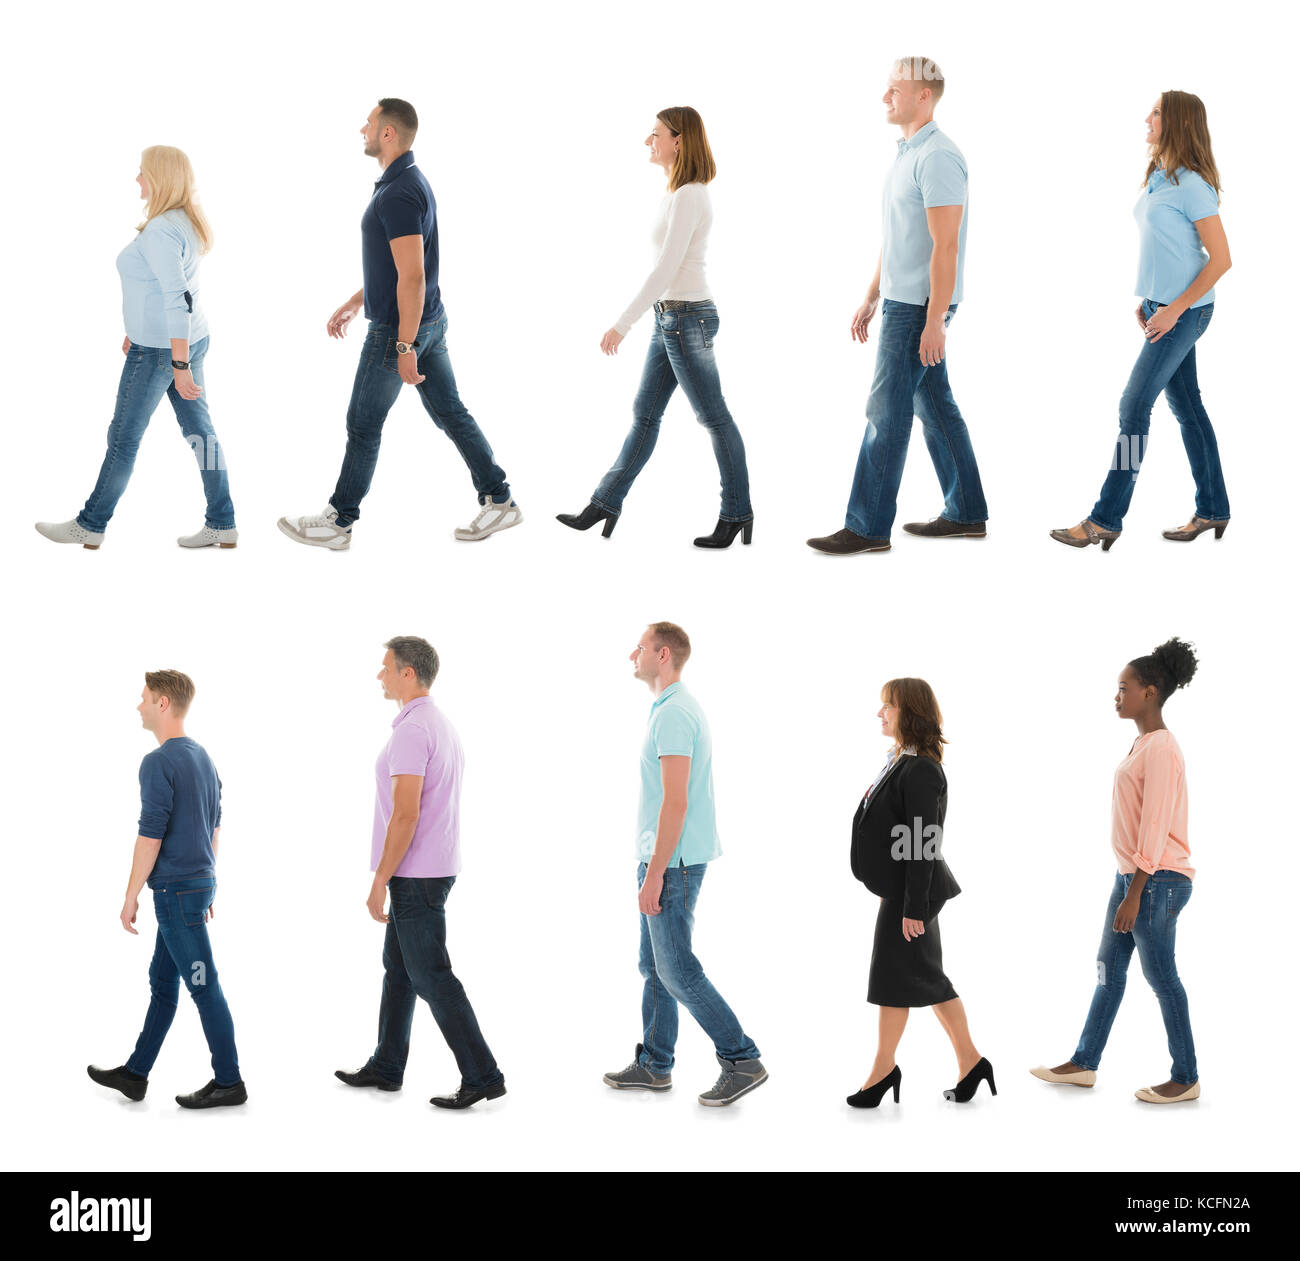 Group Of People Walking In Line Against White Background Stock Photo